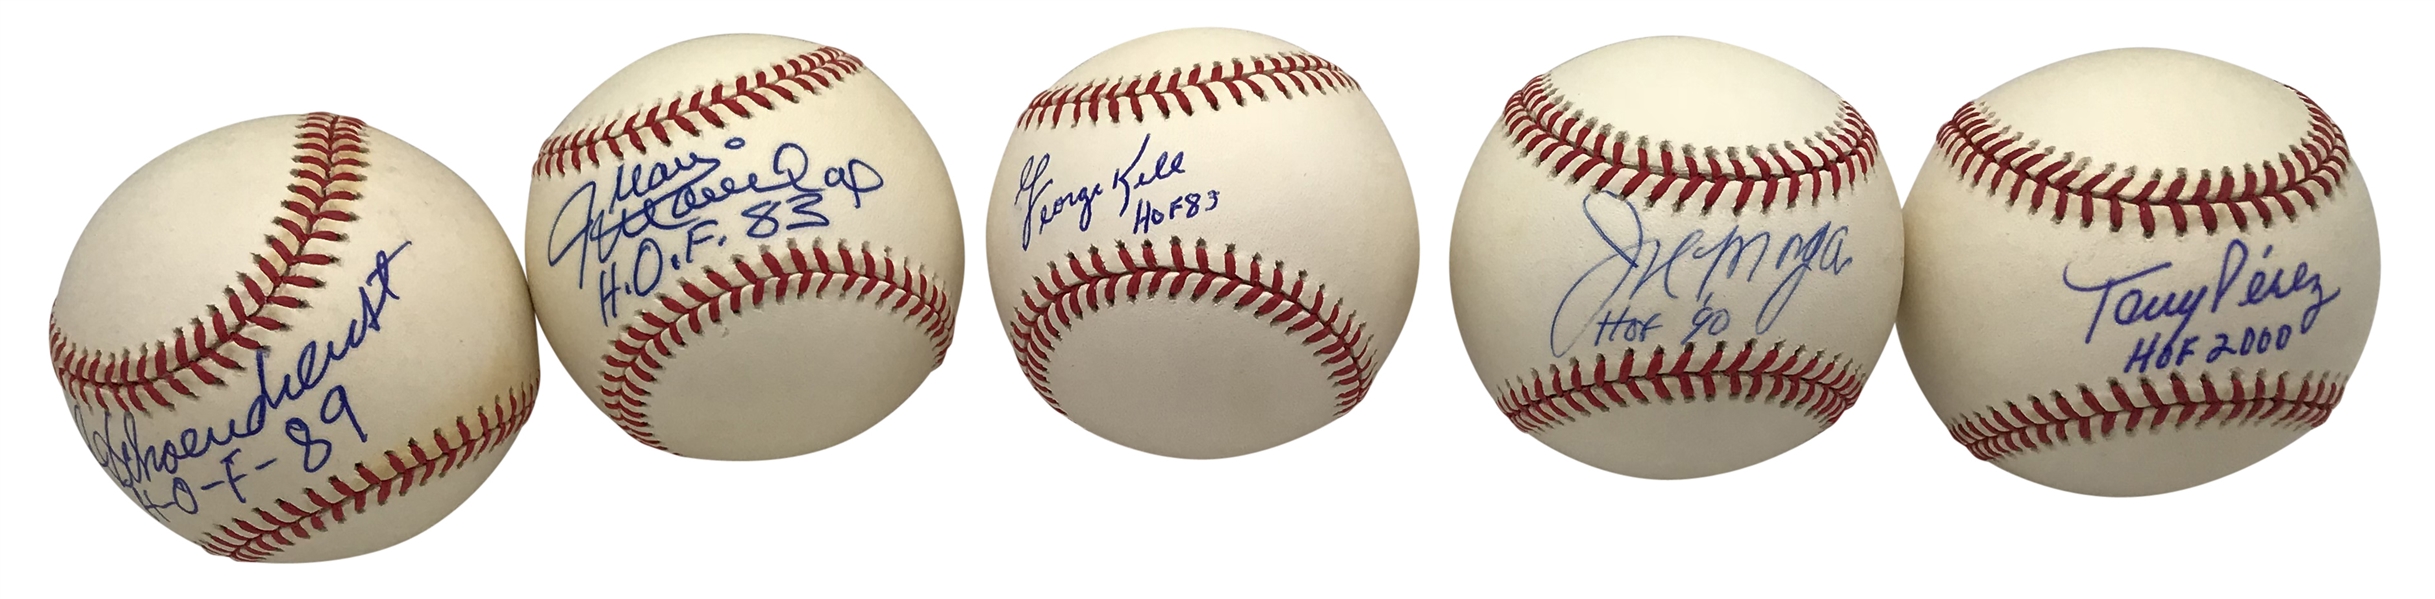 Lot of Ten (10) Signed & Hall of Fame Inscribed Baseballs w/ Morgan, Williams, Ford & Others! (Beckett/BAS Guaranteed)